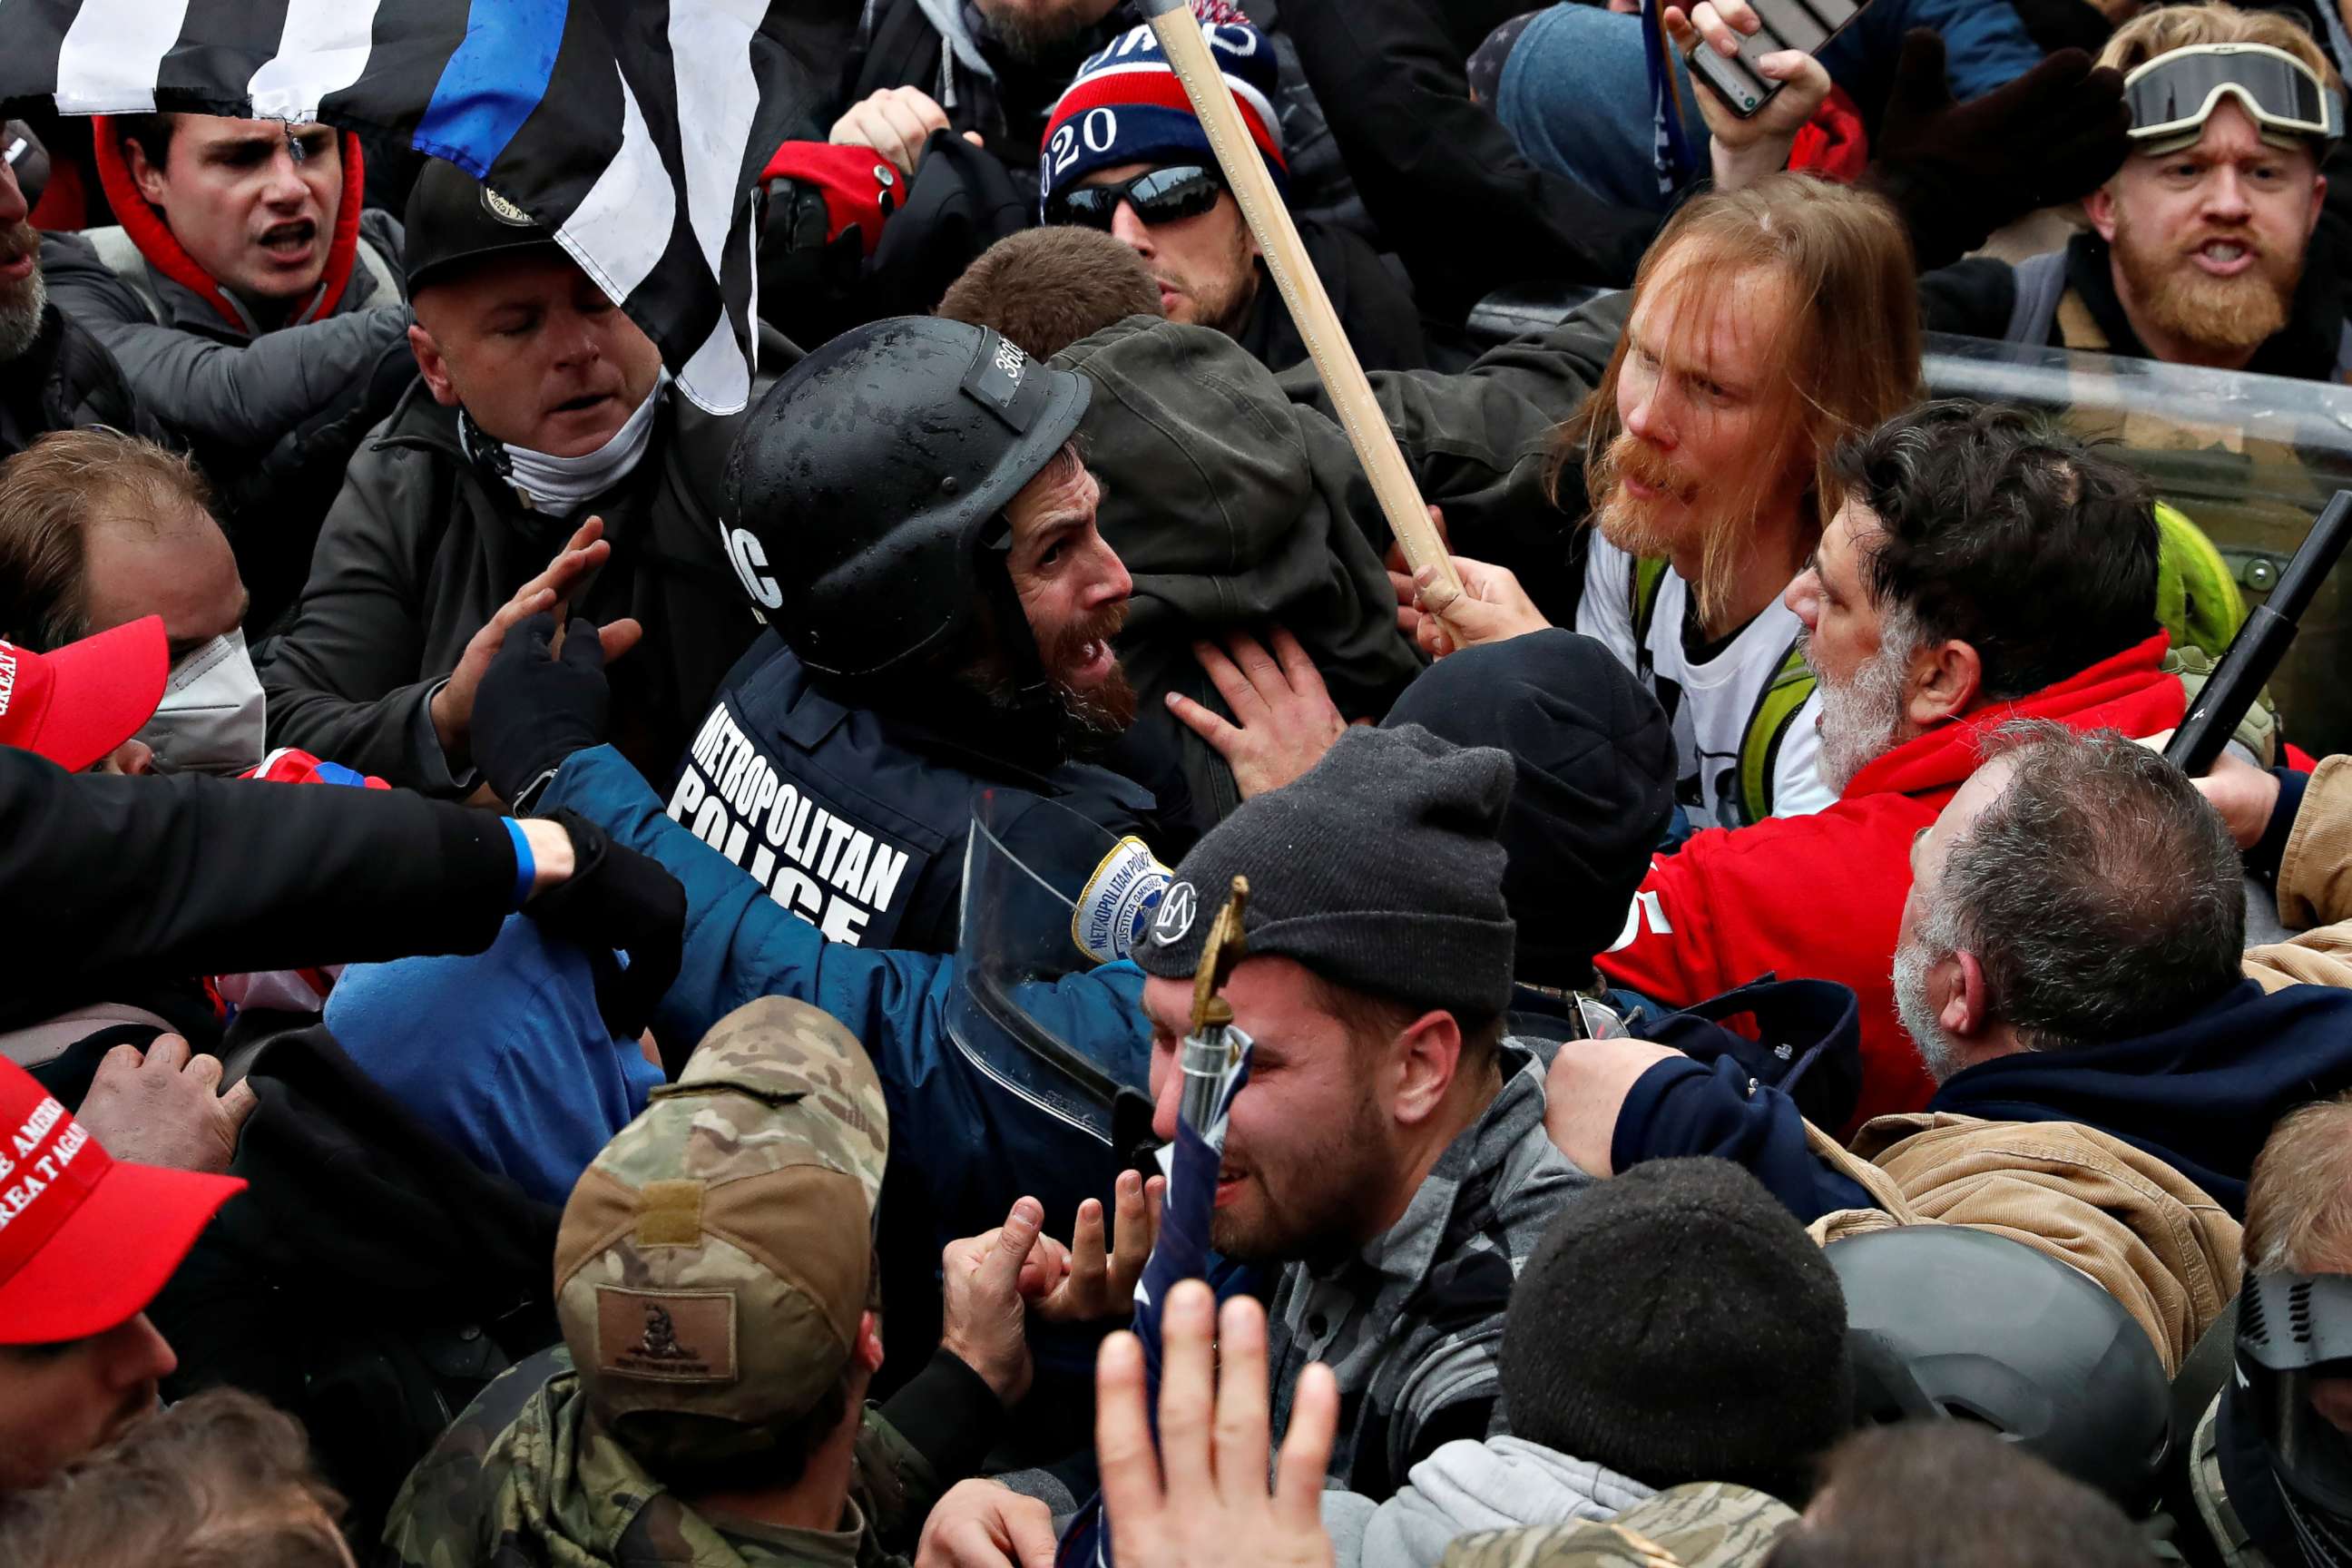 PHOTO: Pro-Trump supporters clash with police at the Capitol building in Washington on Jan. 6, 2021.